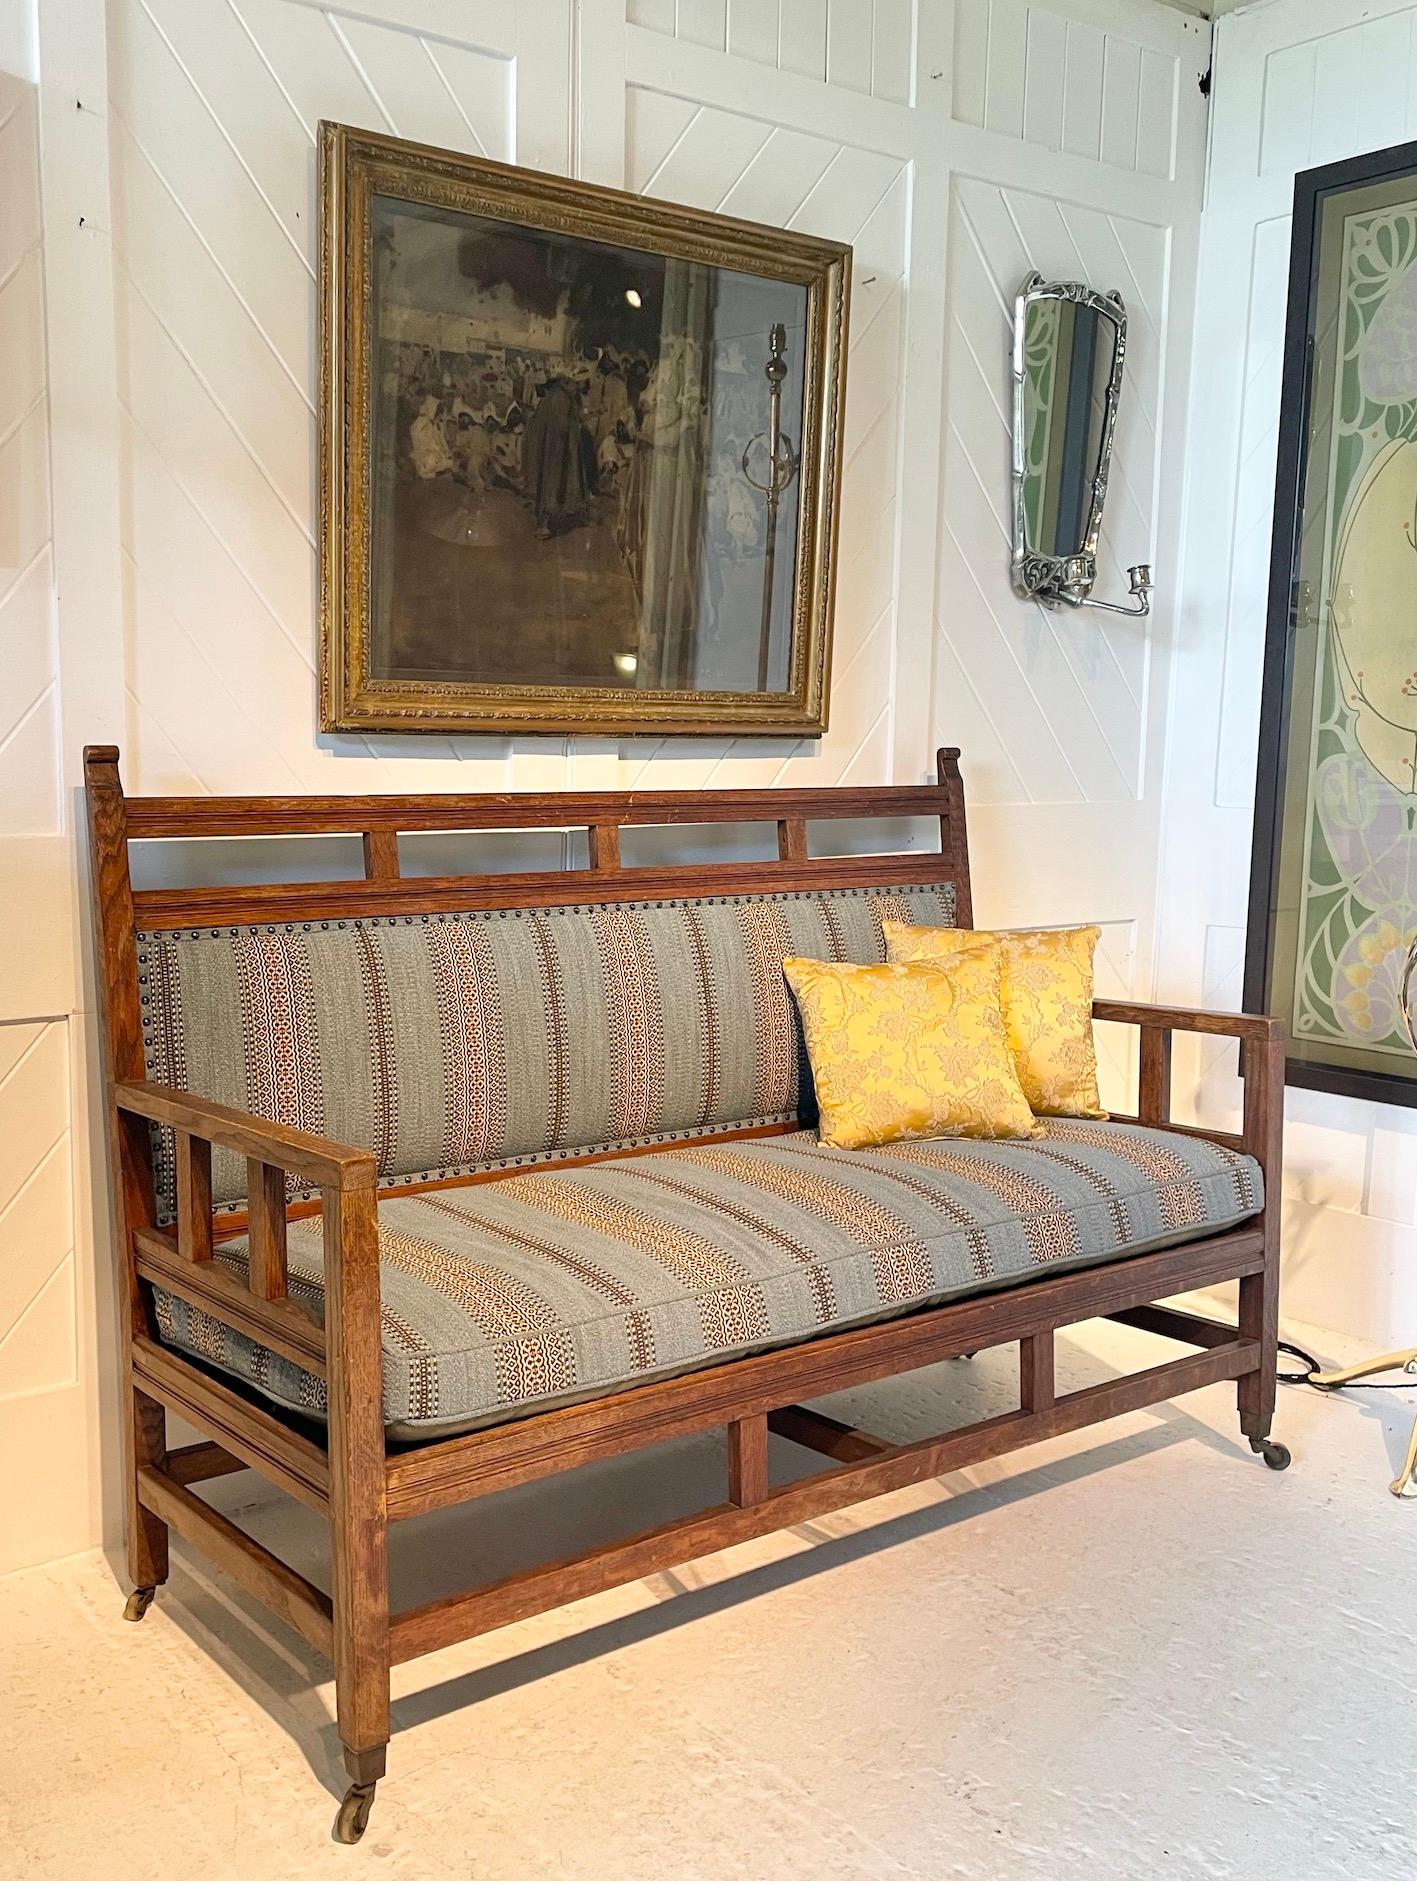 Arts & Crafts oak framed settee 
Raised on brass square castors
Re-upholstered

Anglo-Japanese design

In the manner of E.W. Godwin

Circa 1890